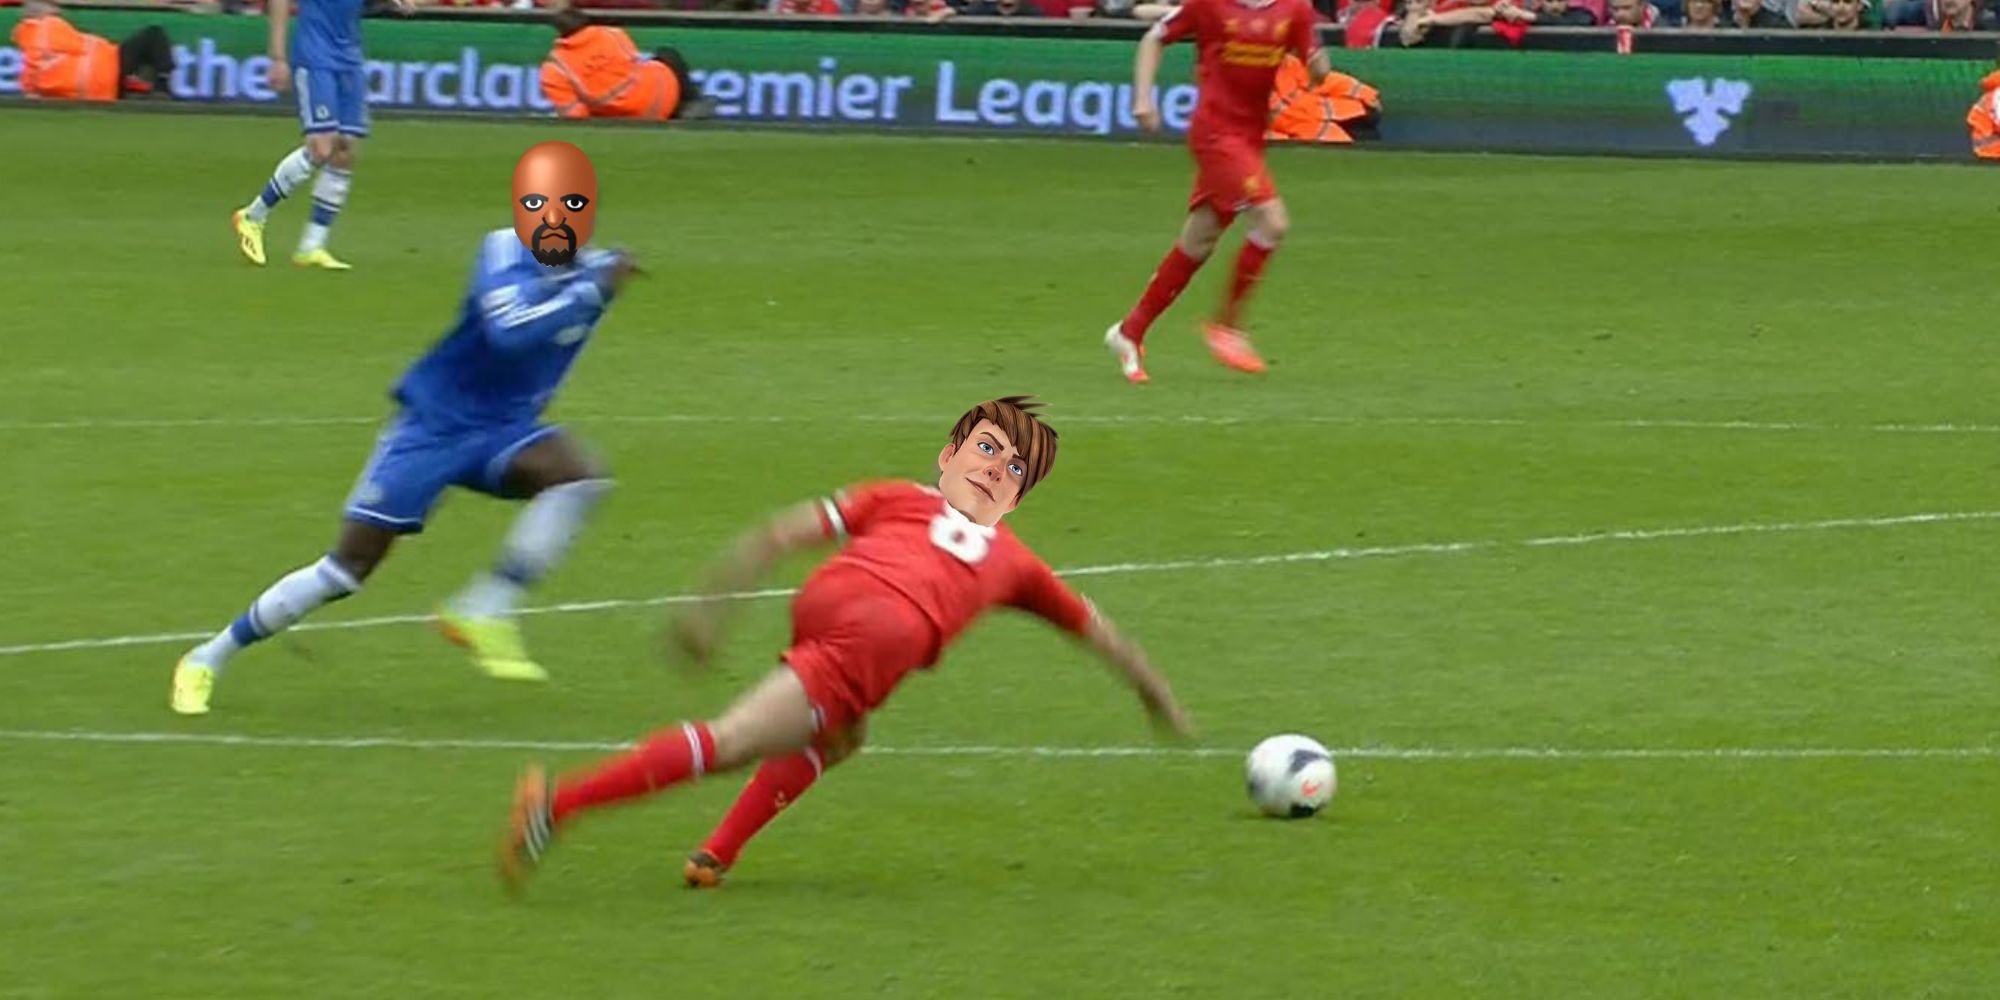 Matt from Wii Sports and Eagle from Kinect Rivals as Ba and Gerrard during the Gerrard Slip